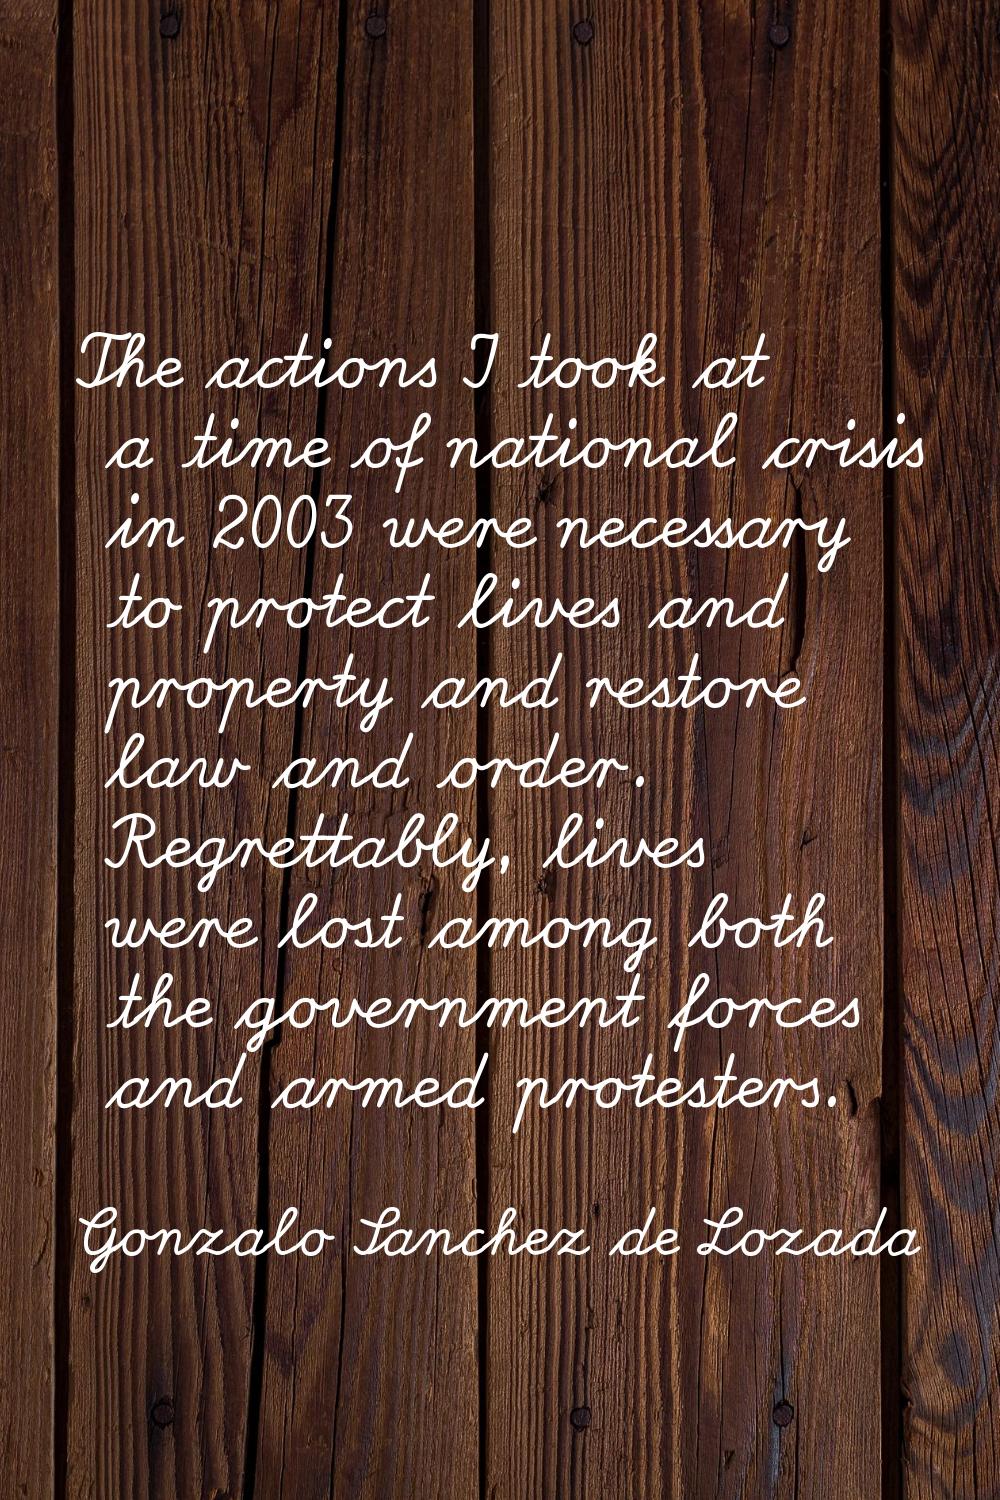 The actions I took at a time of national crisis in 2003 were necessary to protect lives and propert